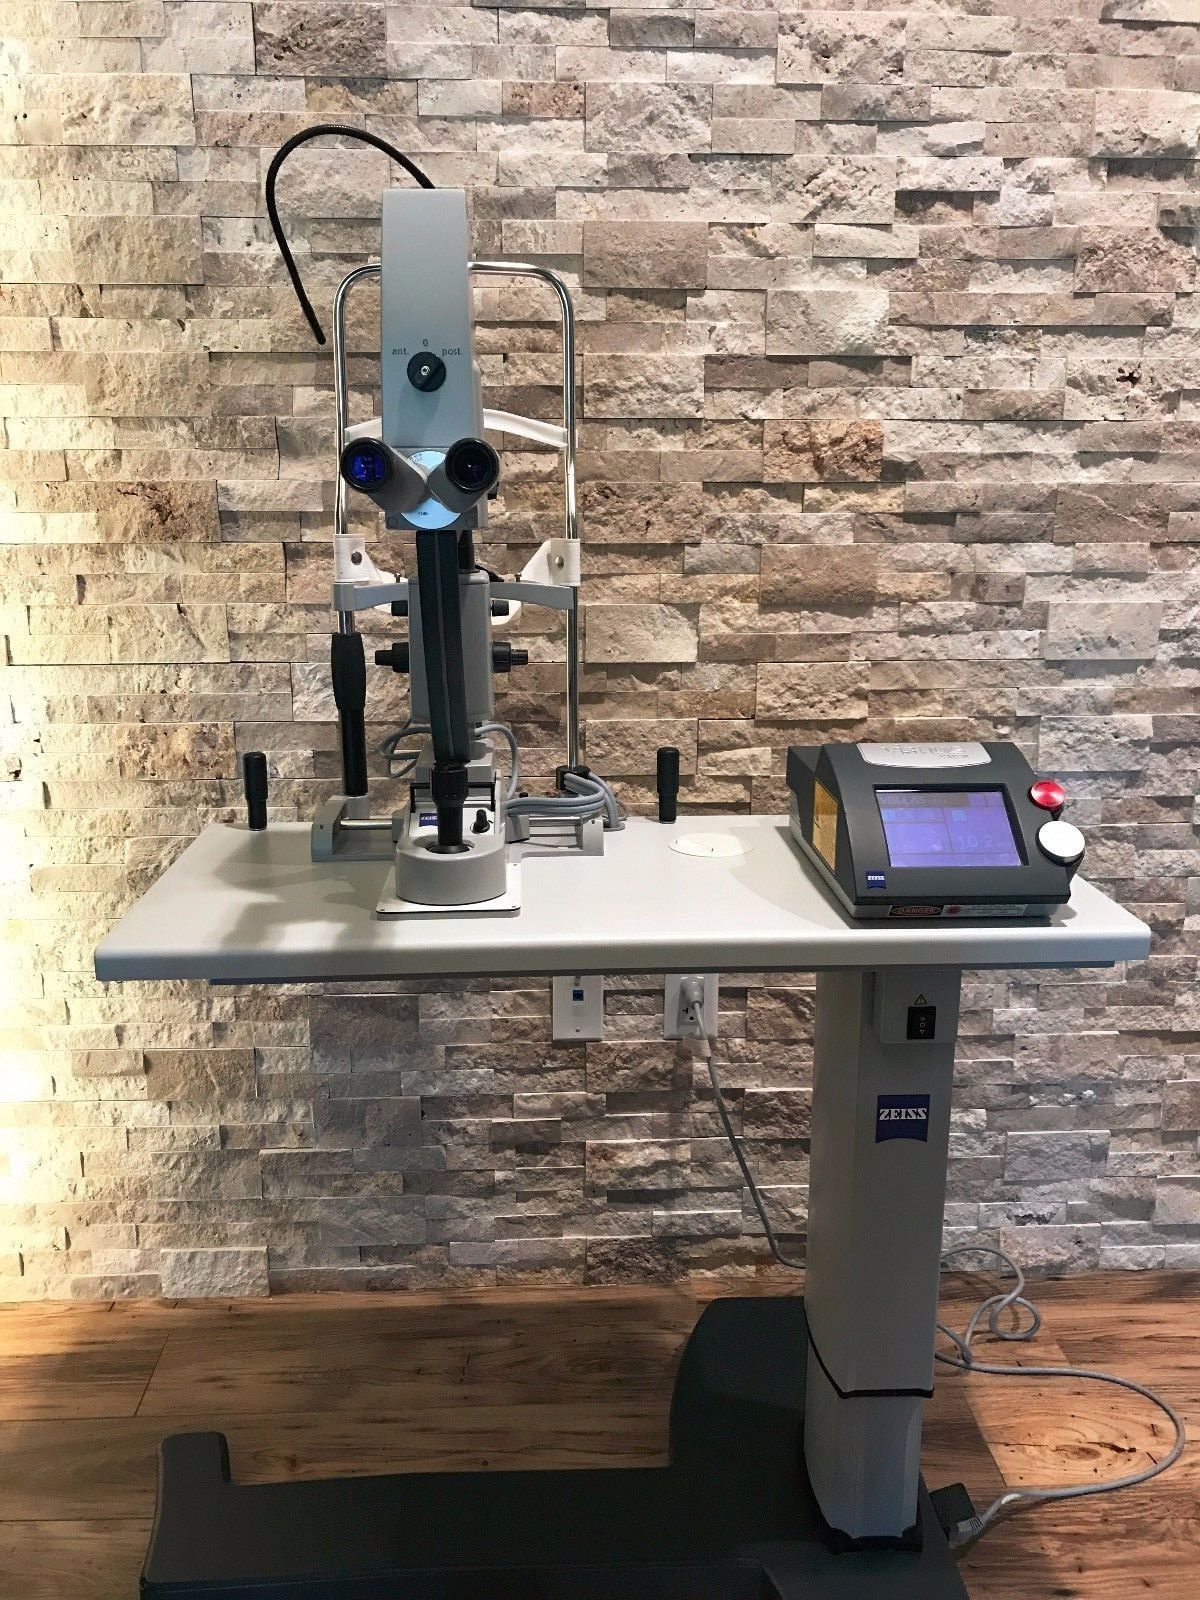 Zeiss Visulas Yag 3 Carl Zeiss OPMI MDO XY Ophthalmic Surgical Microscope on S5 Stand for Cataract